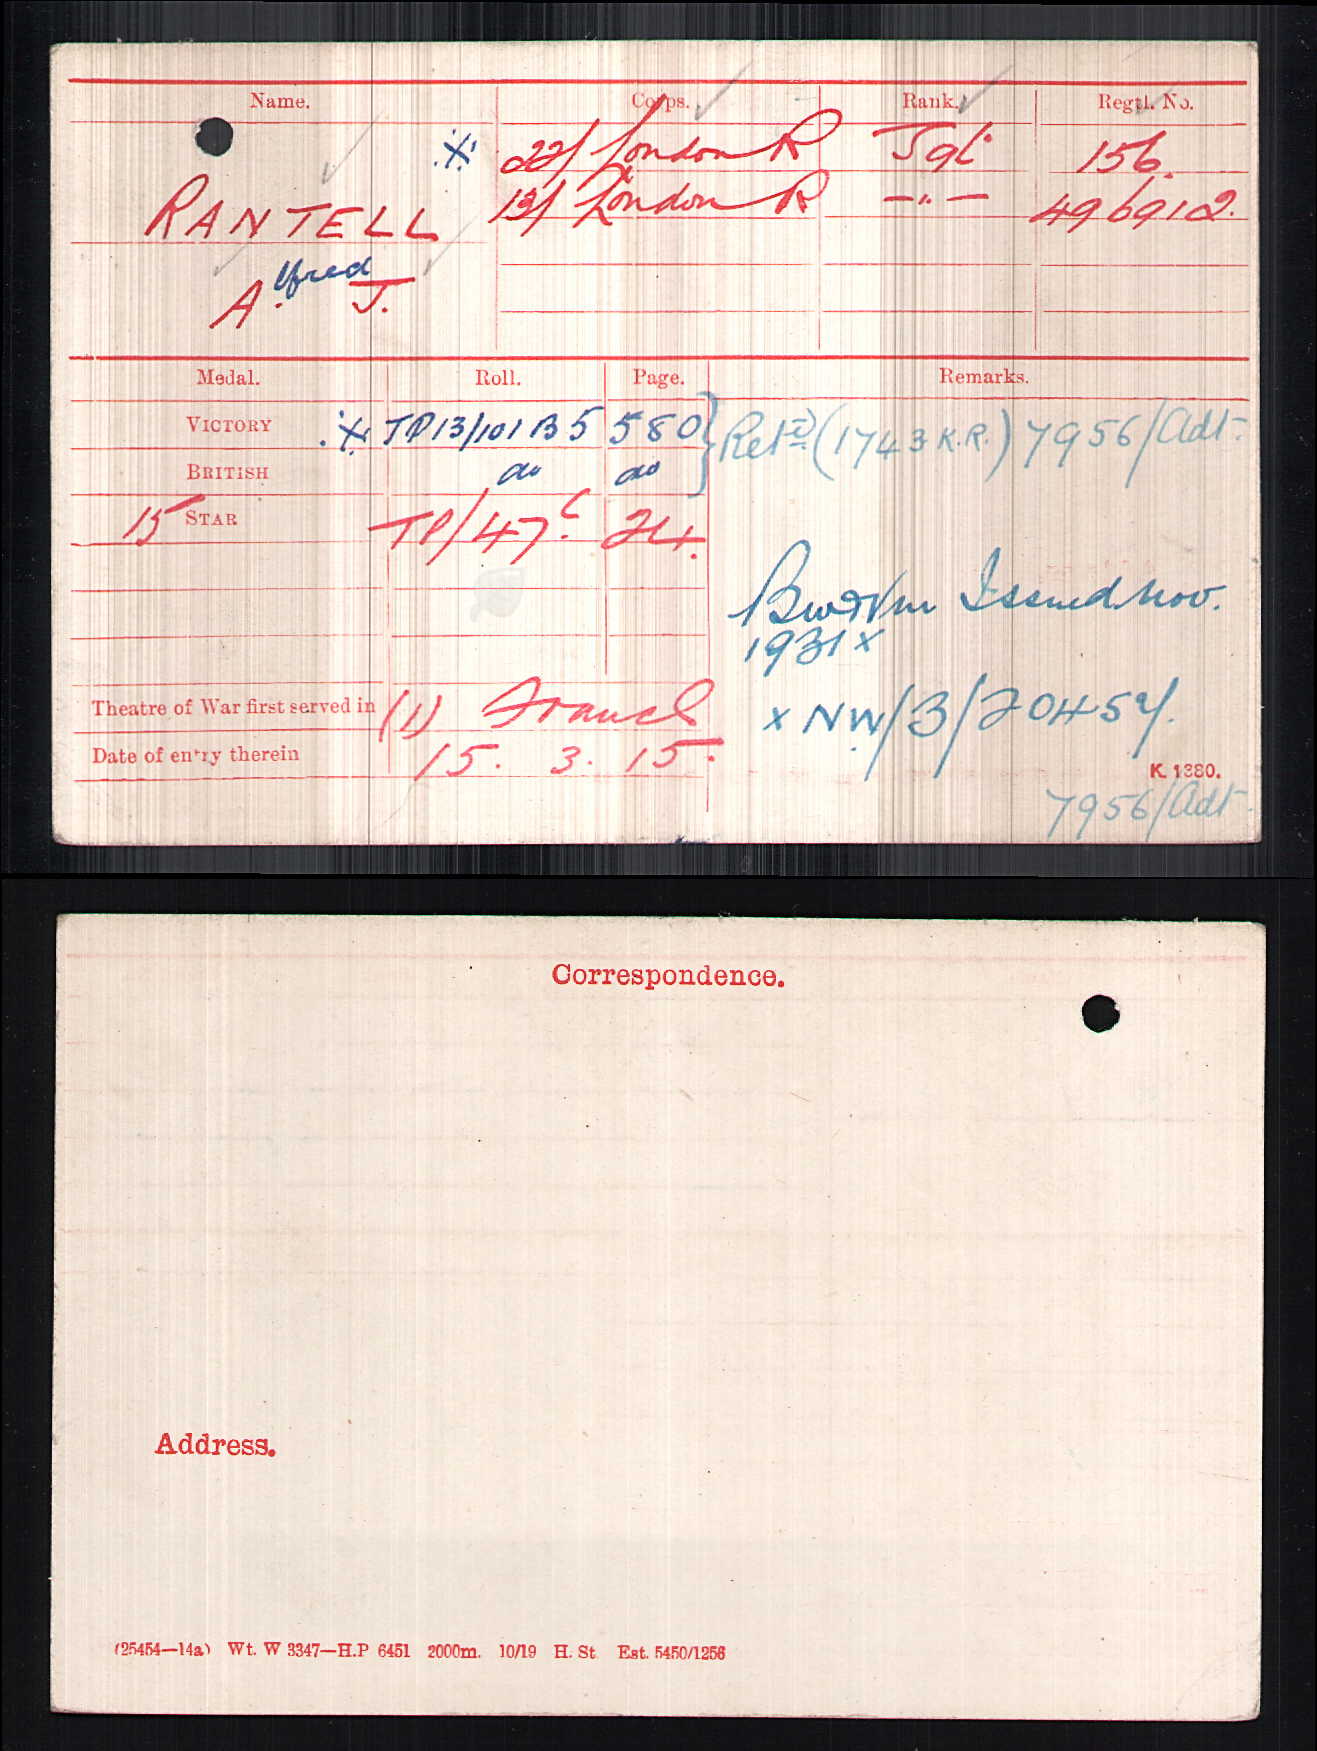 Alfred J Rantell, military record from 1915 